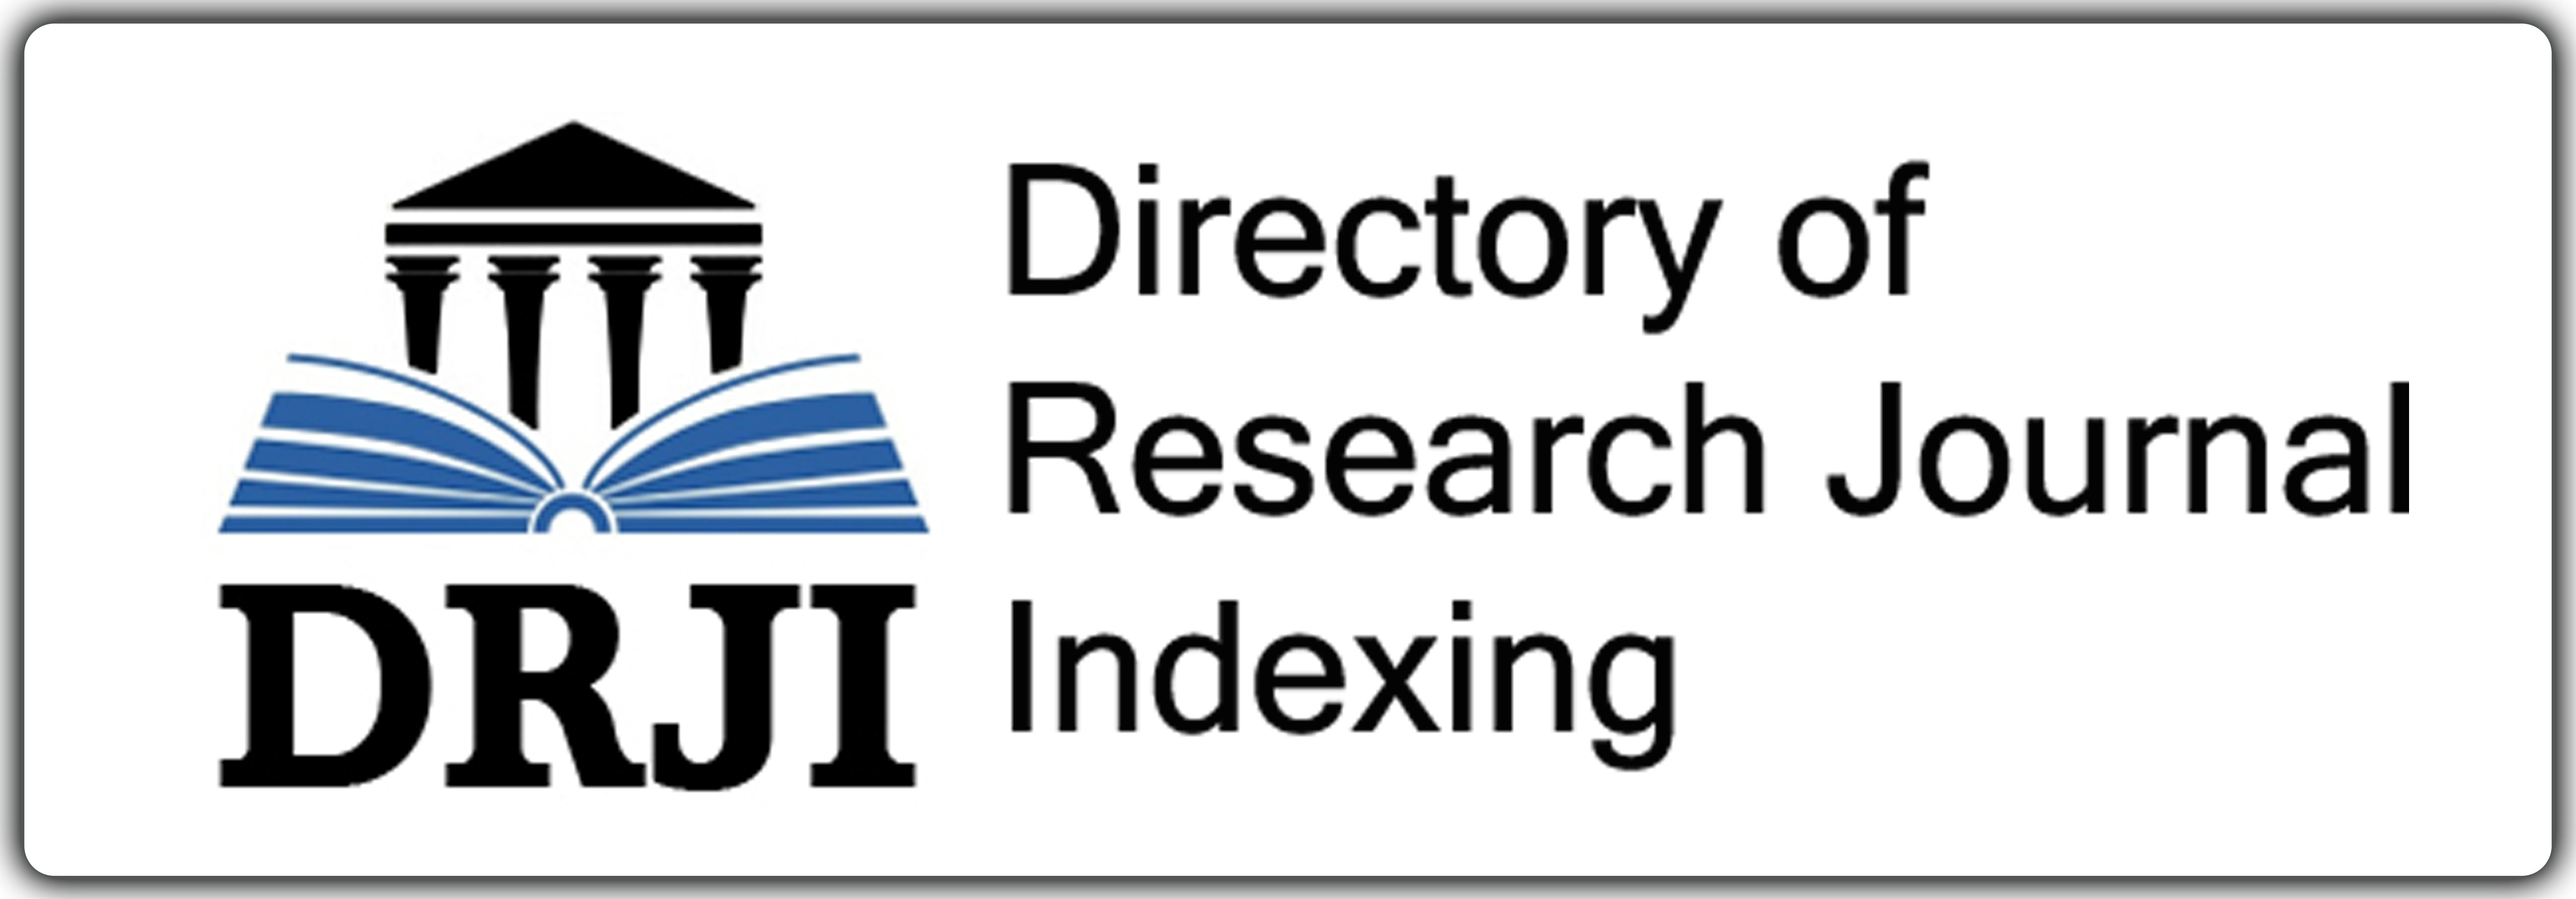 DRJI: Directory of Research Journals Indexing